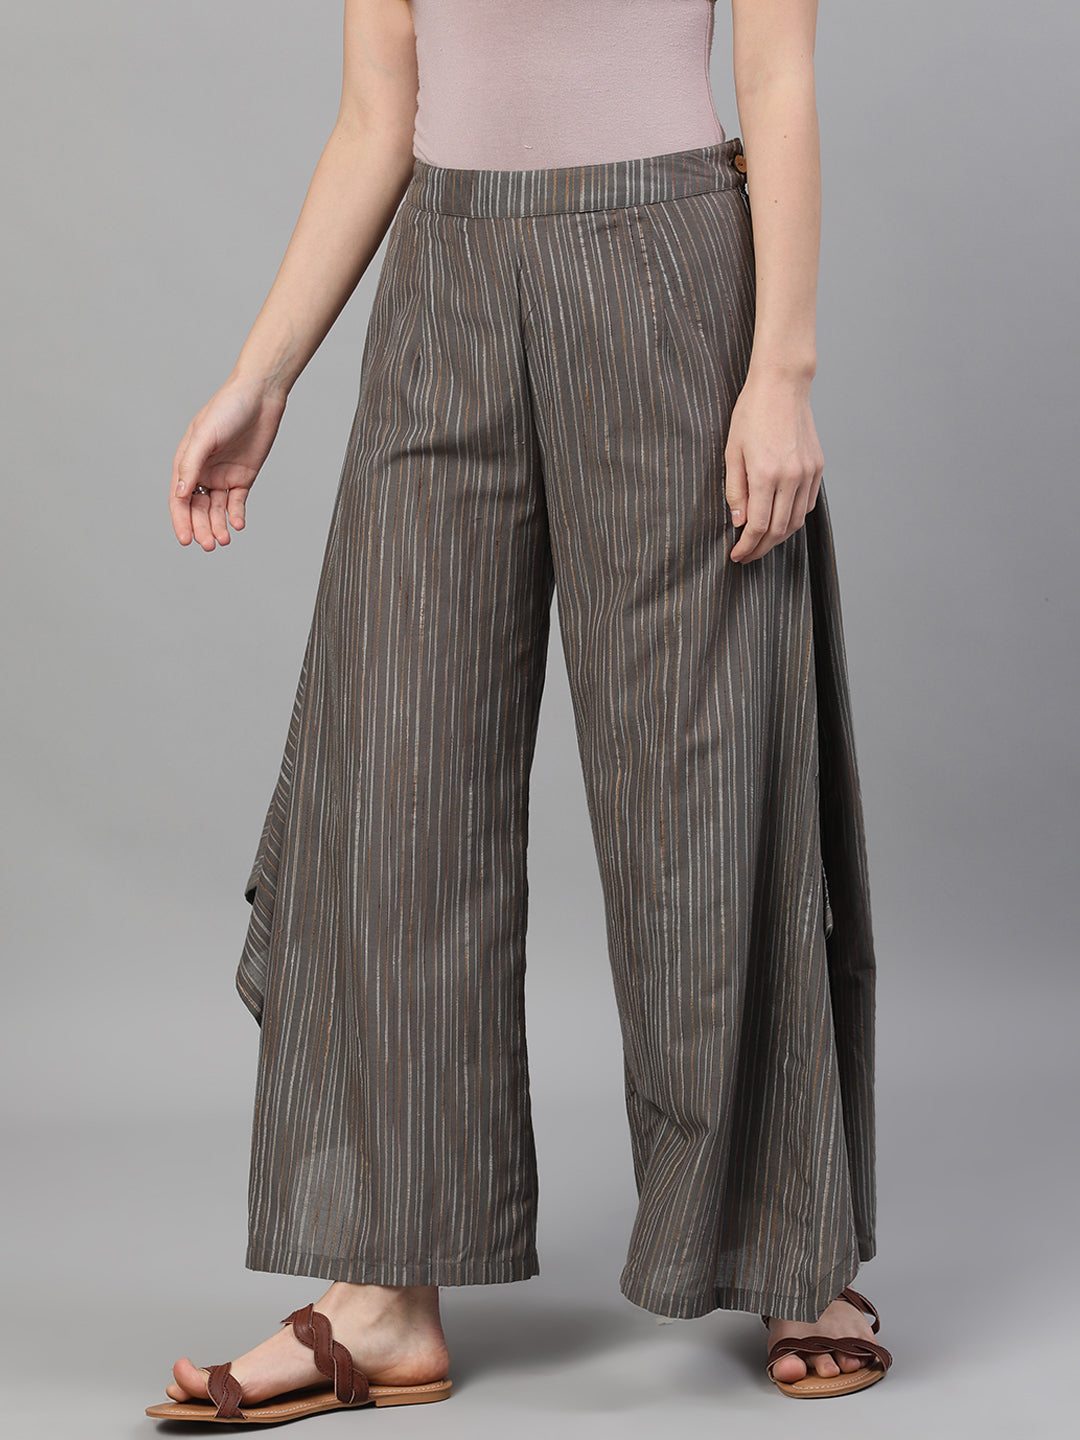 Women's Grey Relaxed Fit Palazzos With Striped Detail - Aks